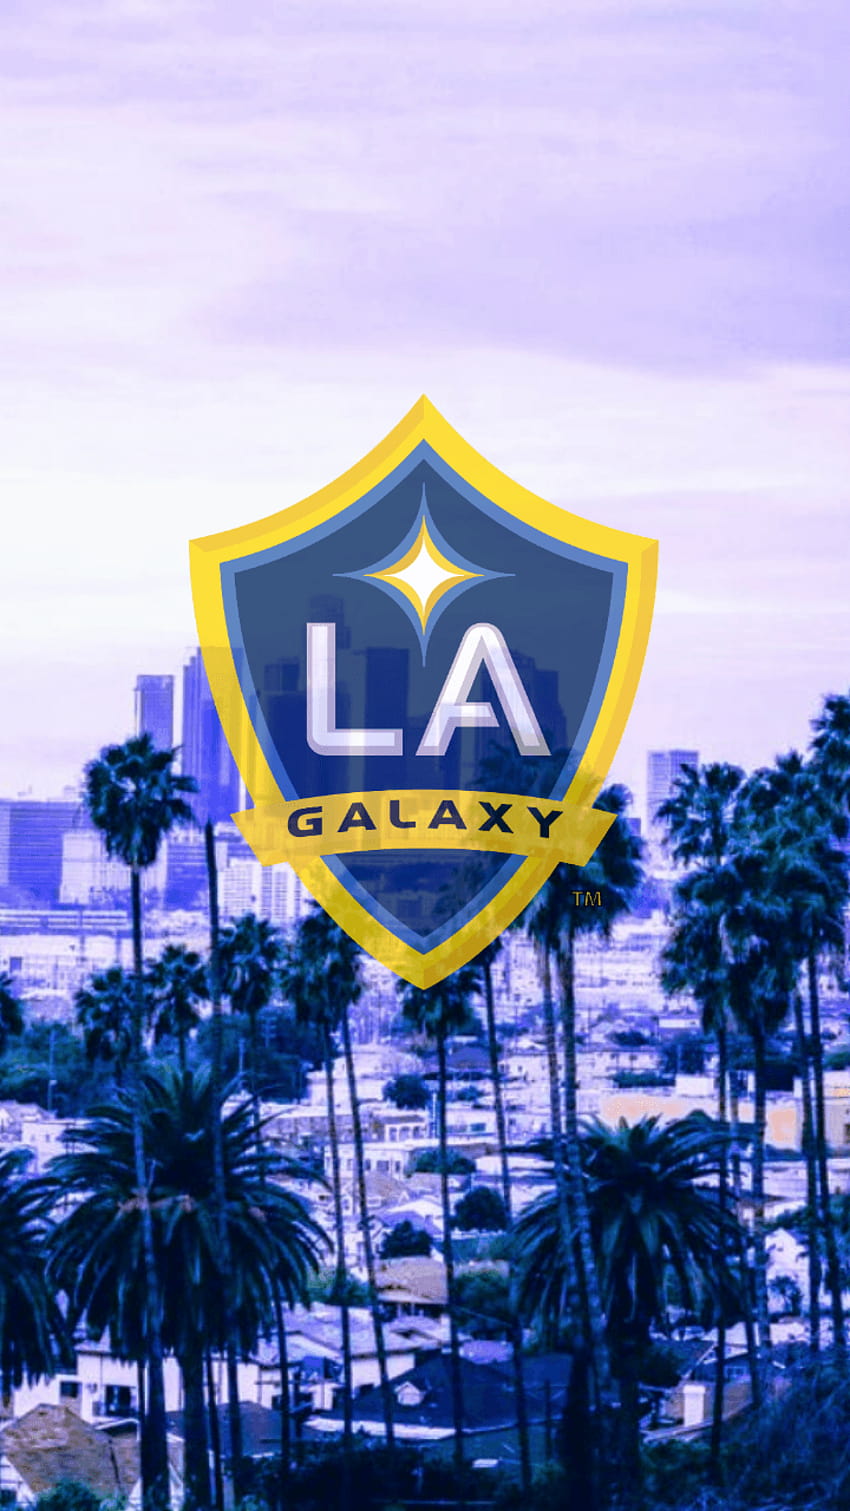 I'll be posting more of my LA Galaxy here in the LA HD phone wallpaper